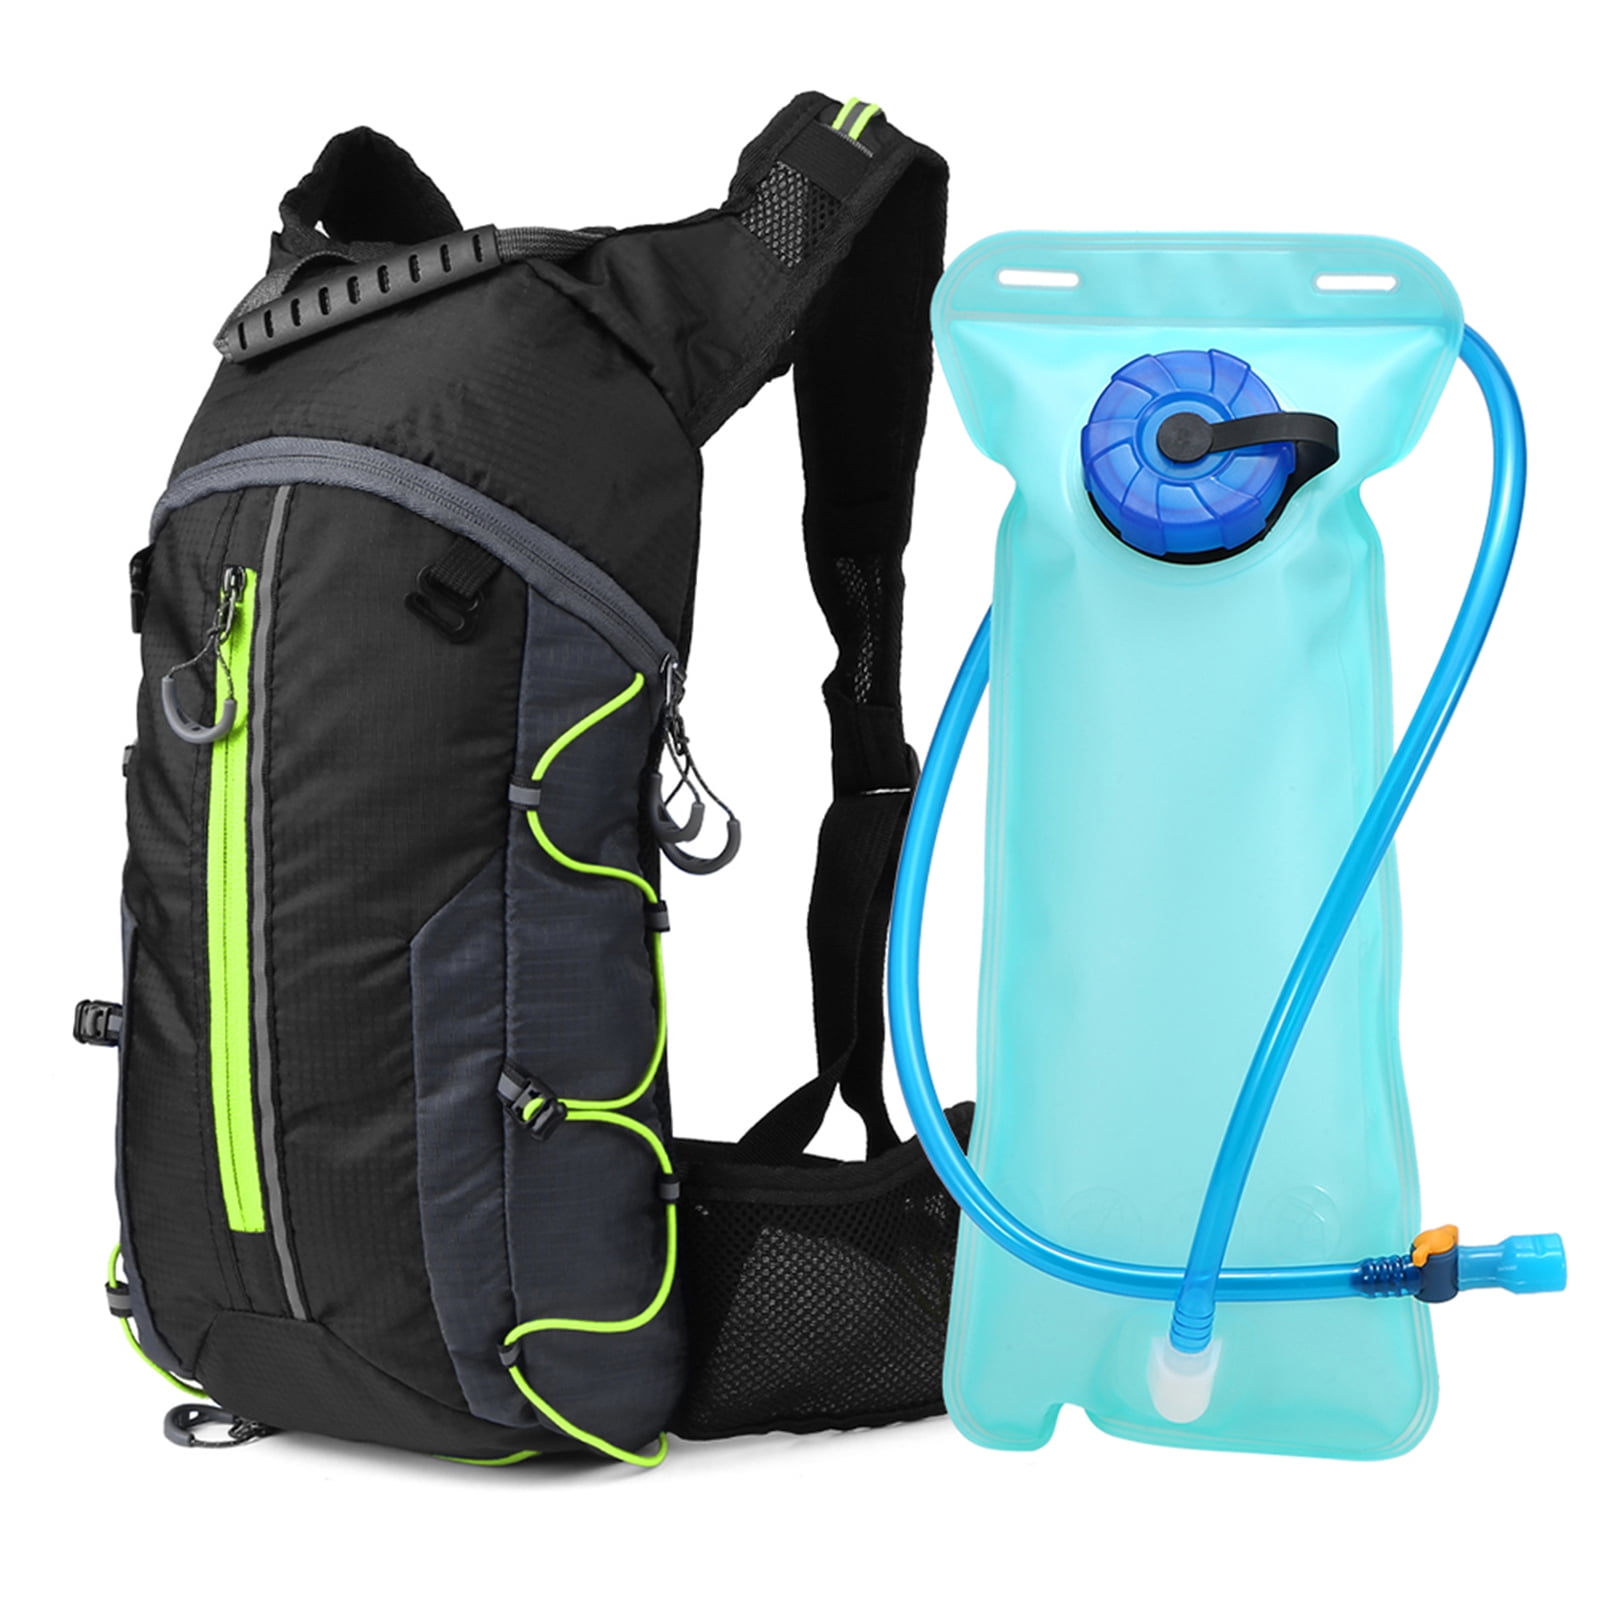 UK Sports Backpack Hiking Hydration Pack Cycling Running Vest 2L Water Pack 